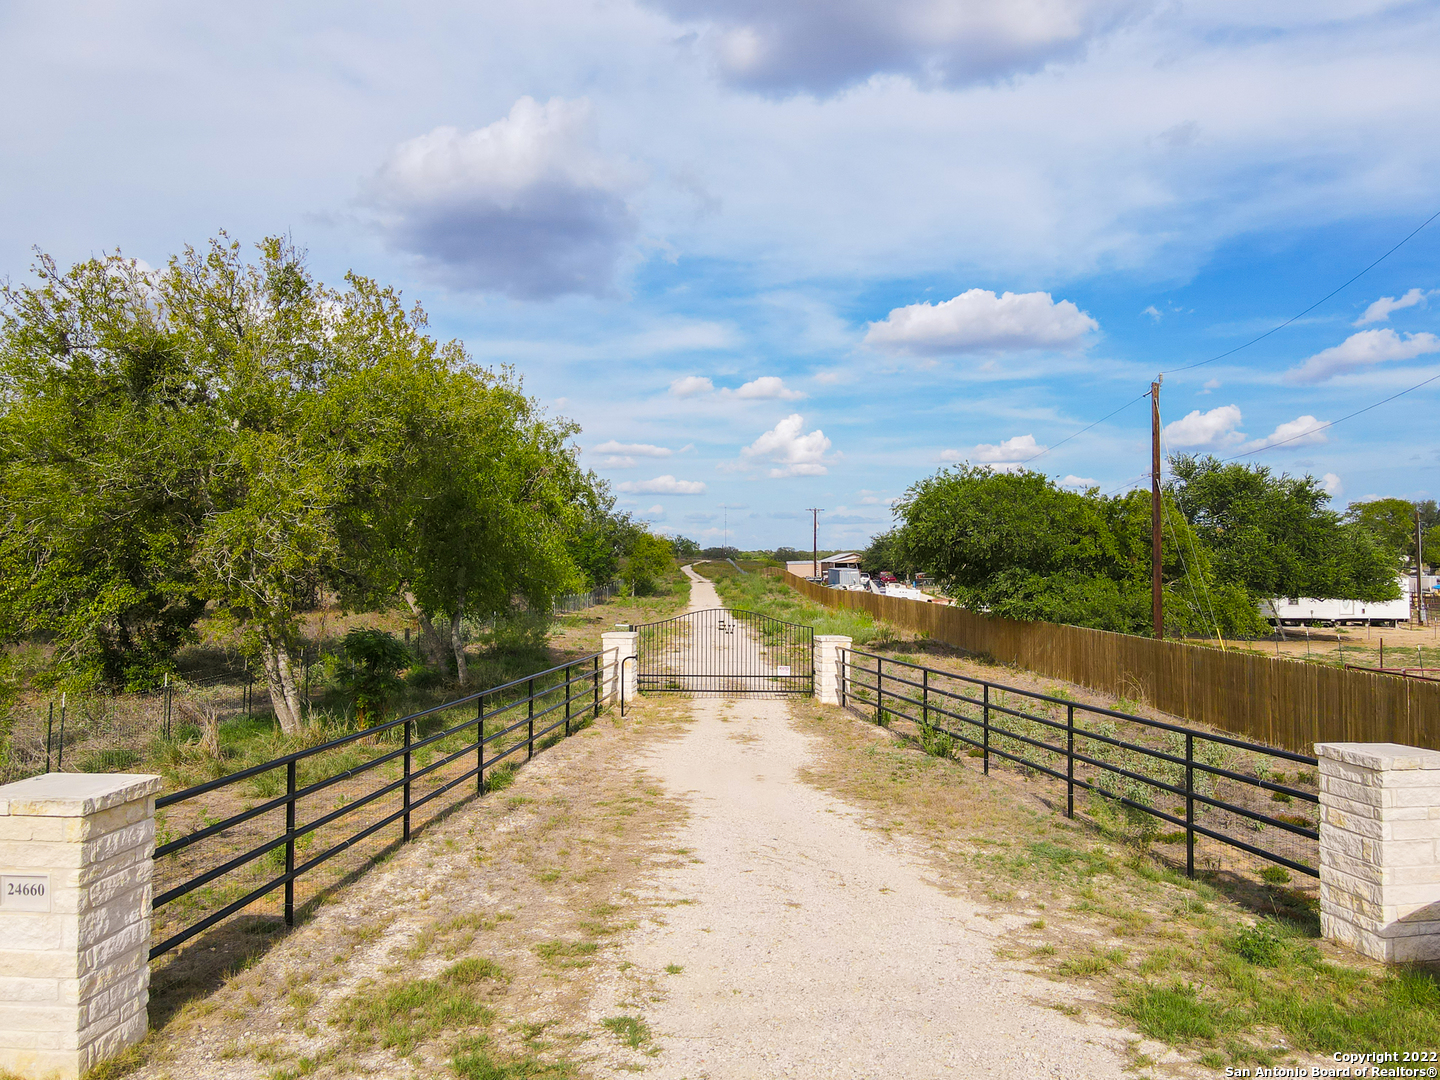 45 acres of grazing, hunting or homestead!   Bring your farm animals or build on your lot!   Cattle guard already in place Ag exemption pending, great hunting just 25 min from downtown San Antonio!  3000 water tank, septic, electric existing on property. City water available at the road.